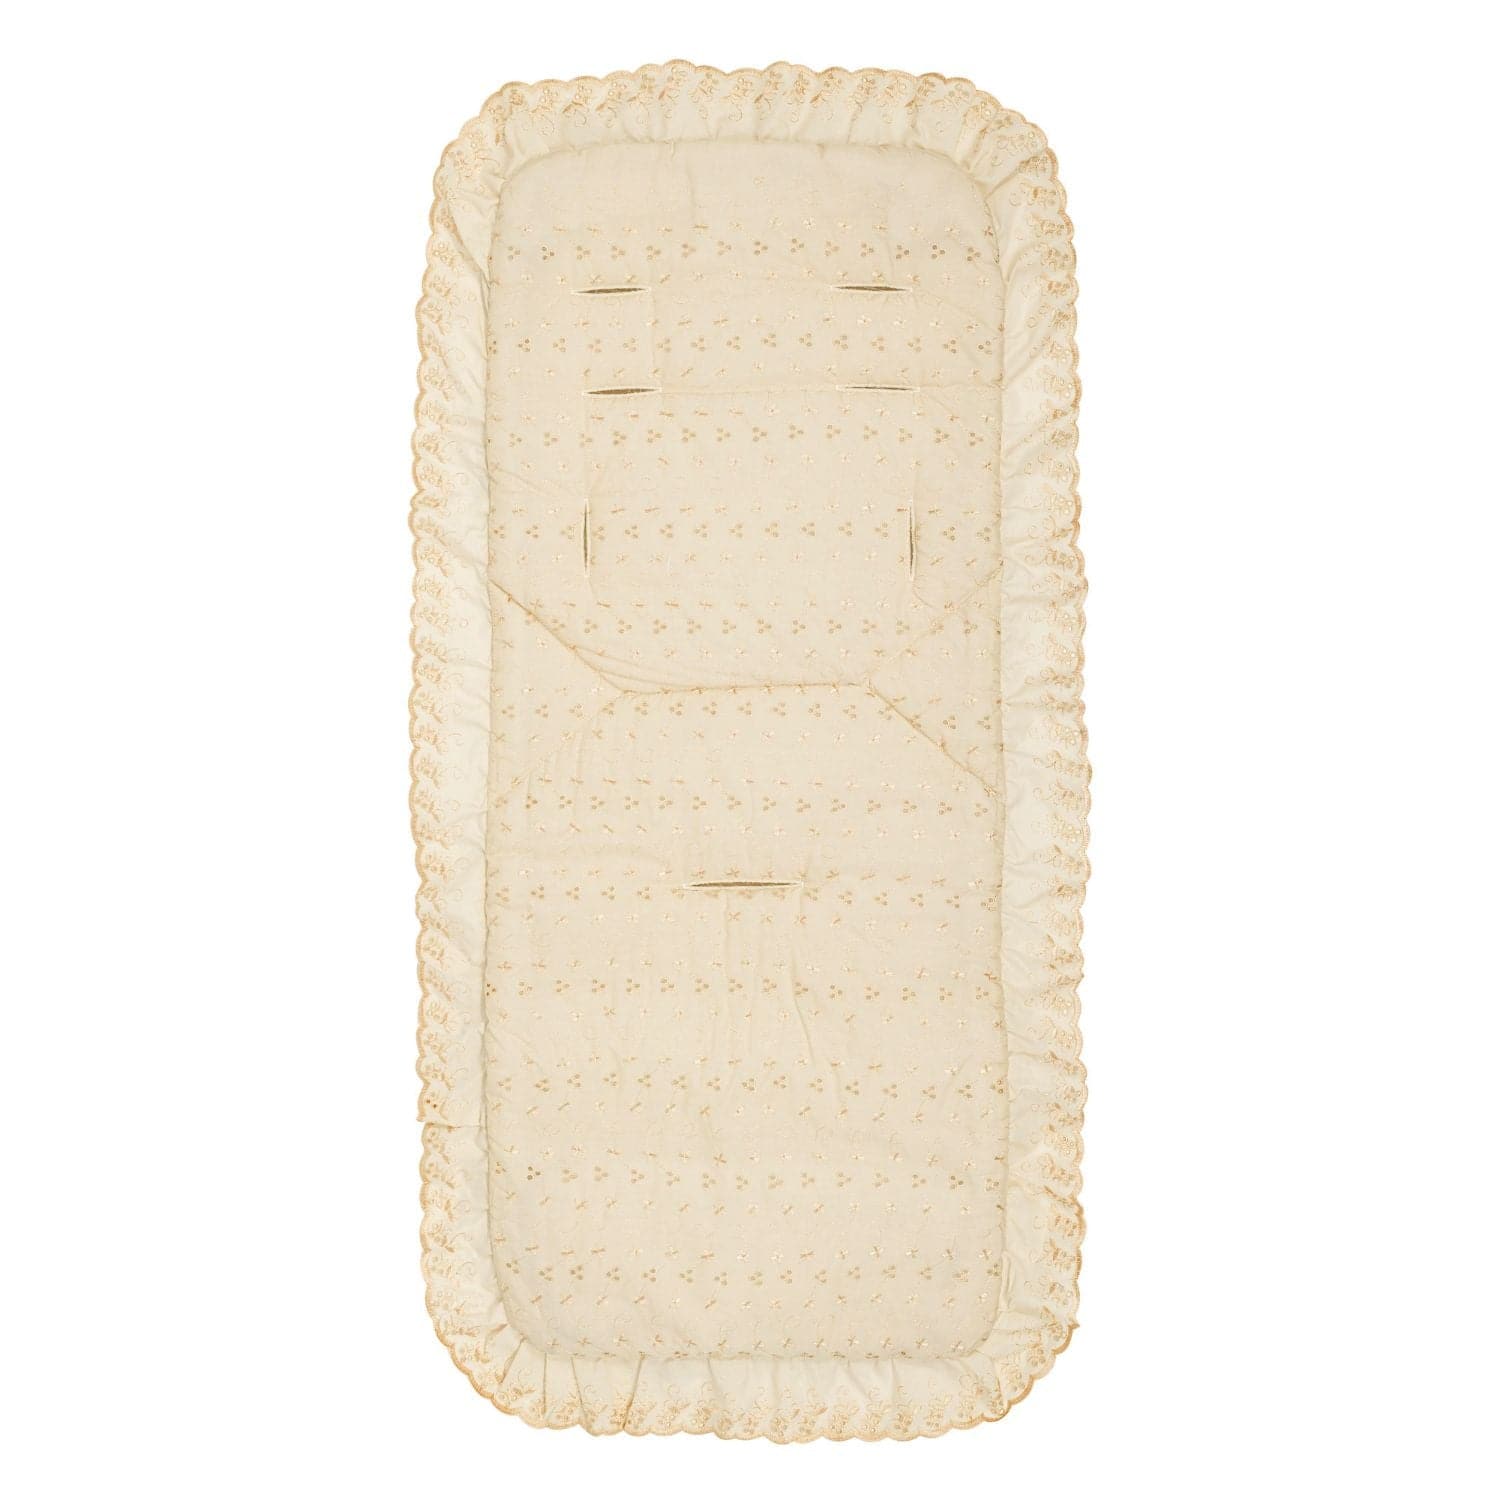 Broderie Anglaise Pushchair Seat Liner Compatible with My Babiie - Fits All Models - For Your Little One